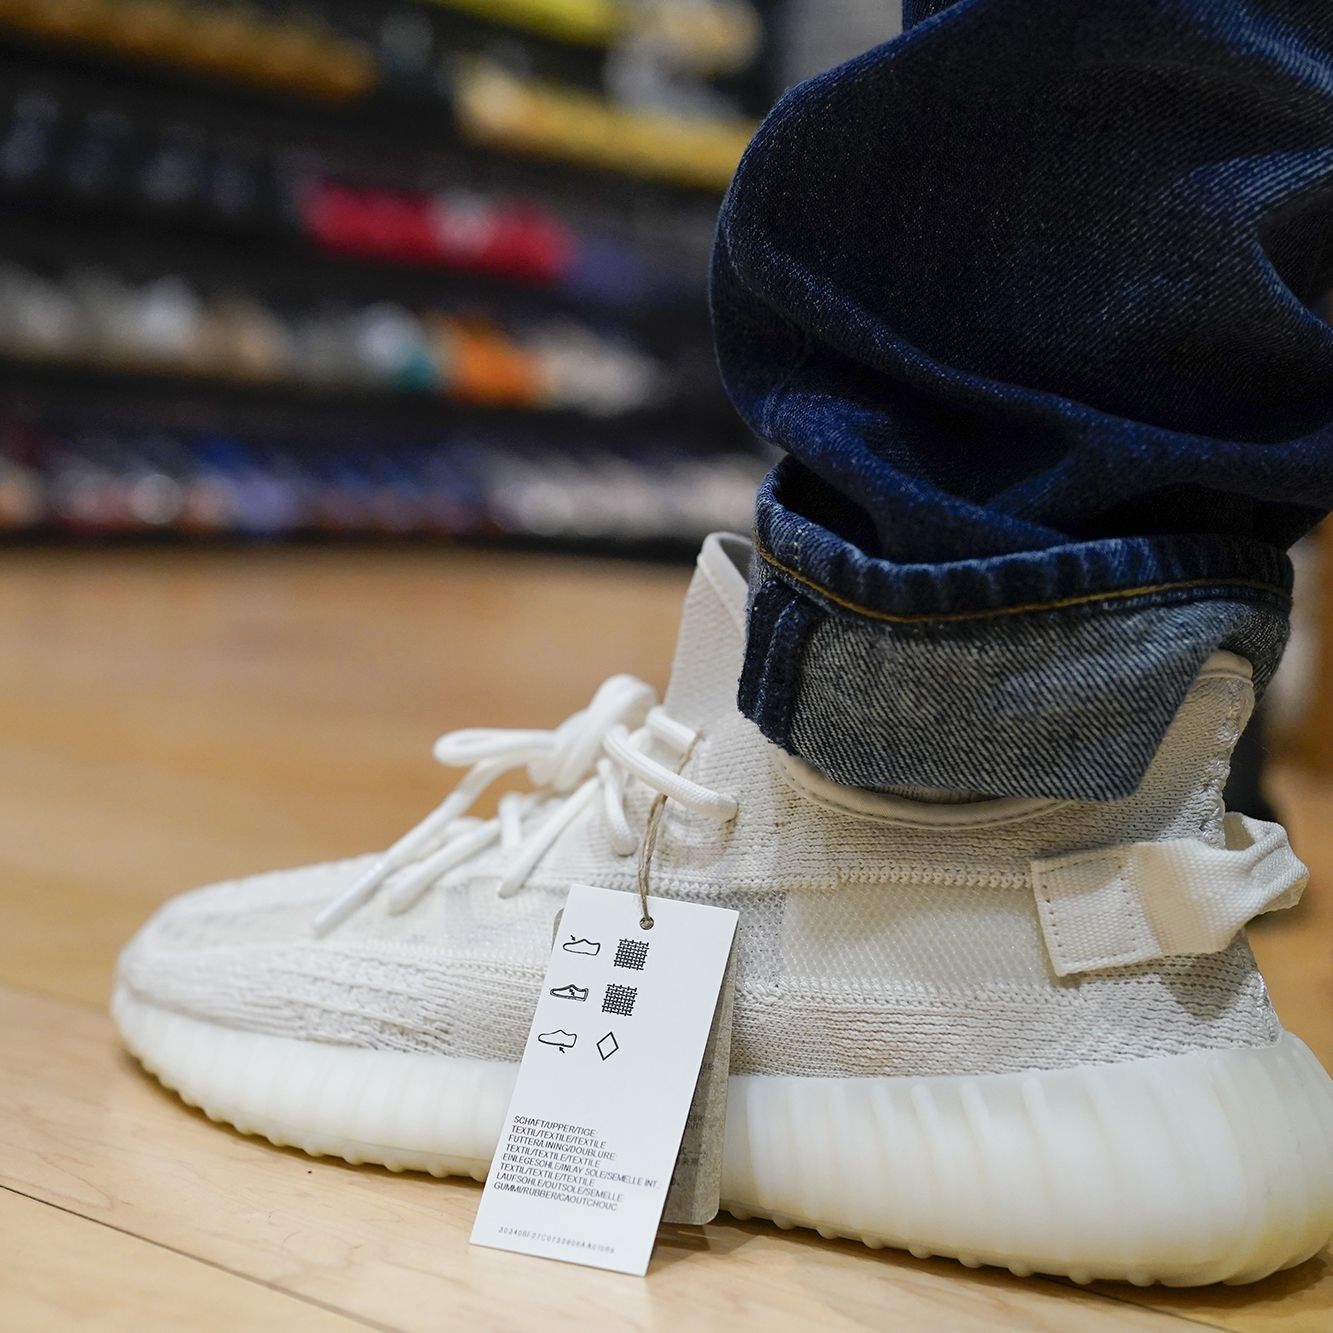 Adidas will continue to sell Kanye West's shoe designs the name | CNN Business